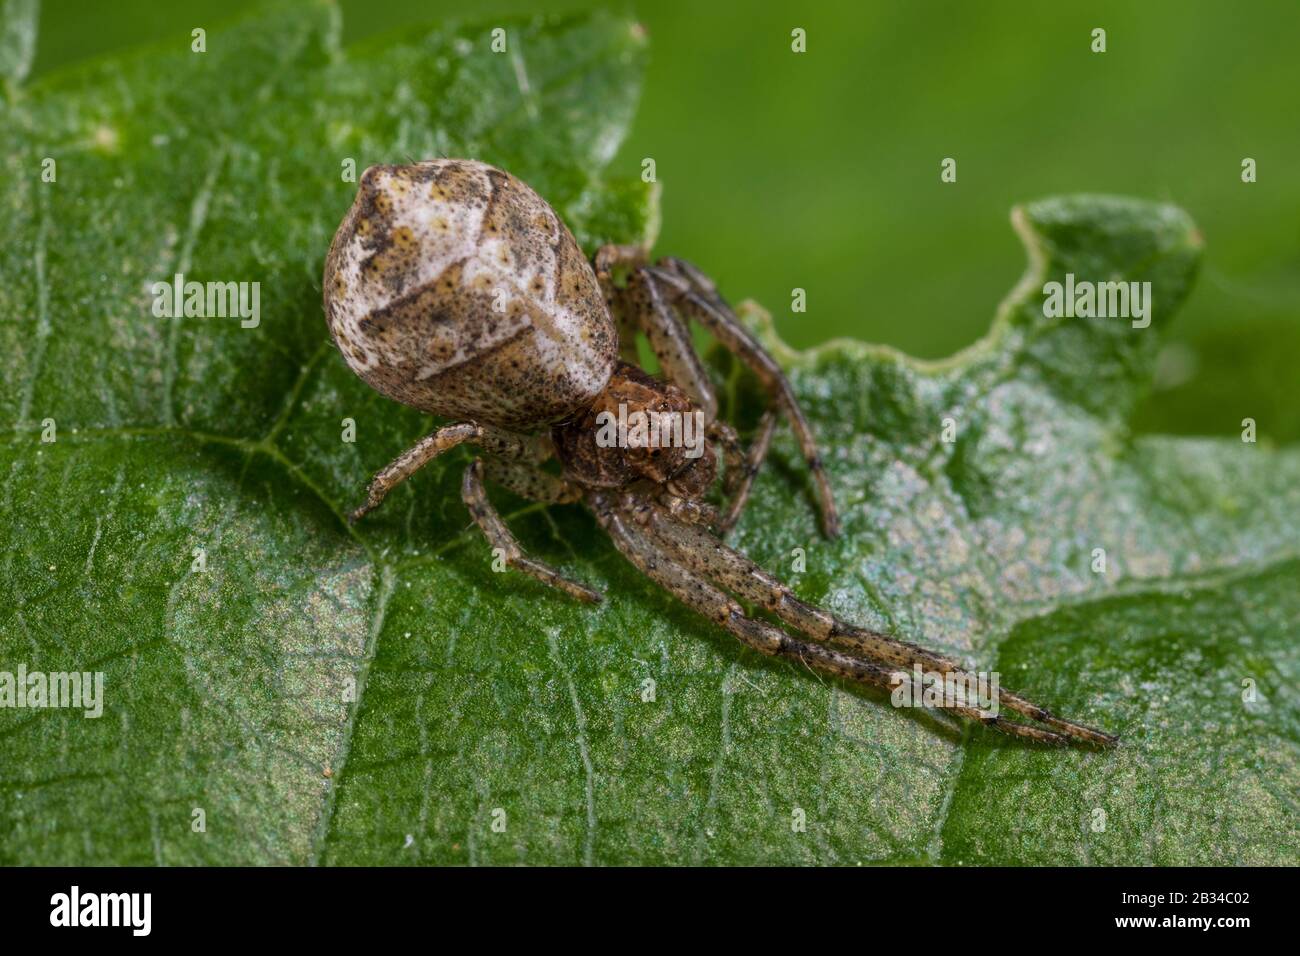 crab spider (Tmarus pige), on a leaf, Germany Stock Photo